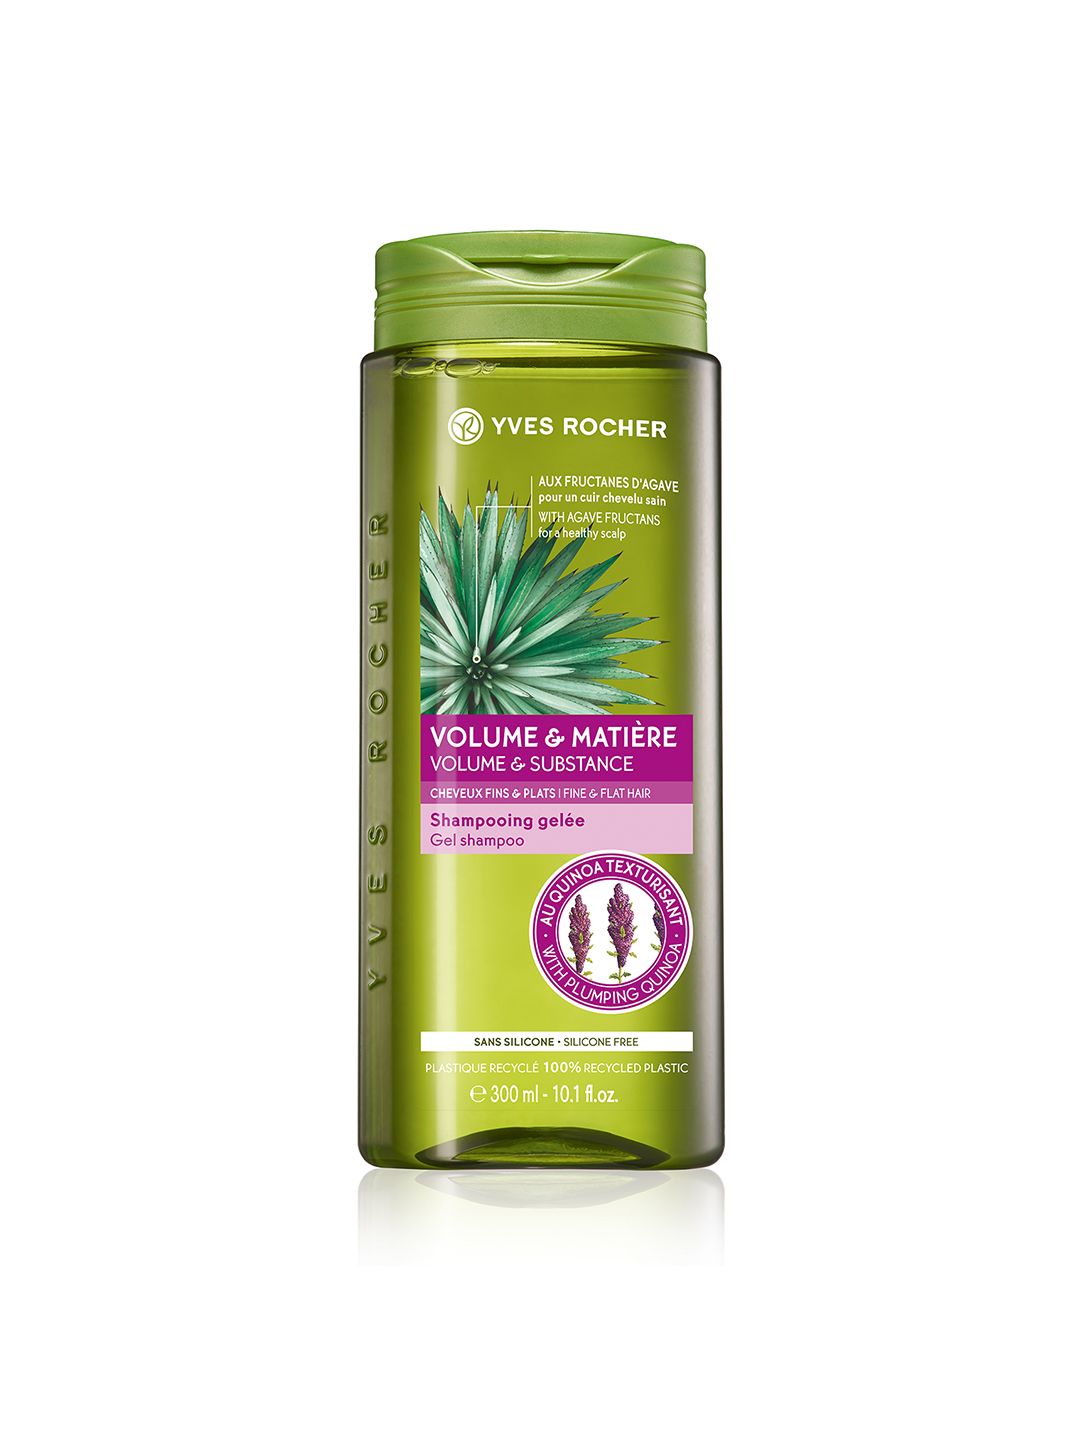 YVES ROCHER Unisex Green Volume and Substance Gel Shampoo 300 ml Price in India